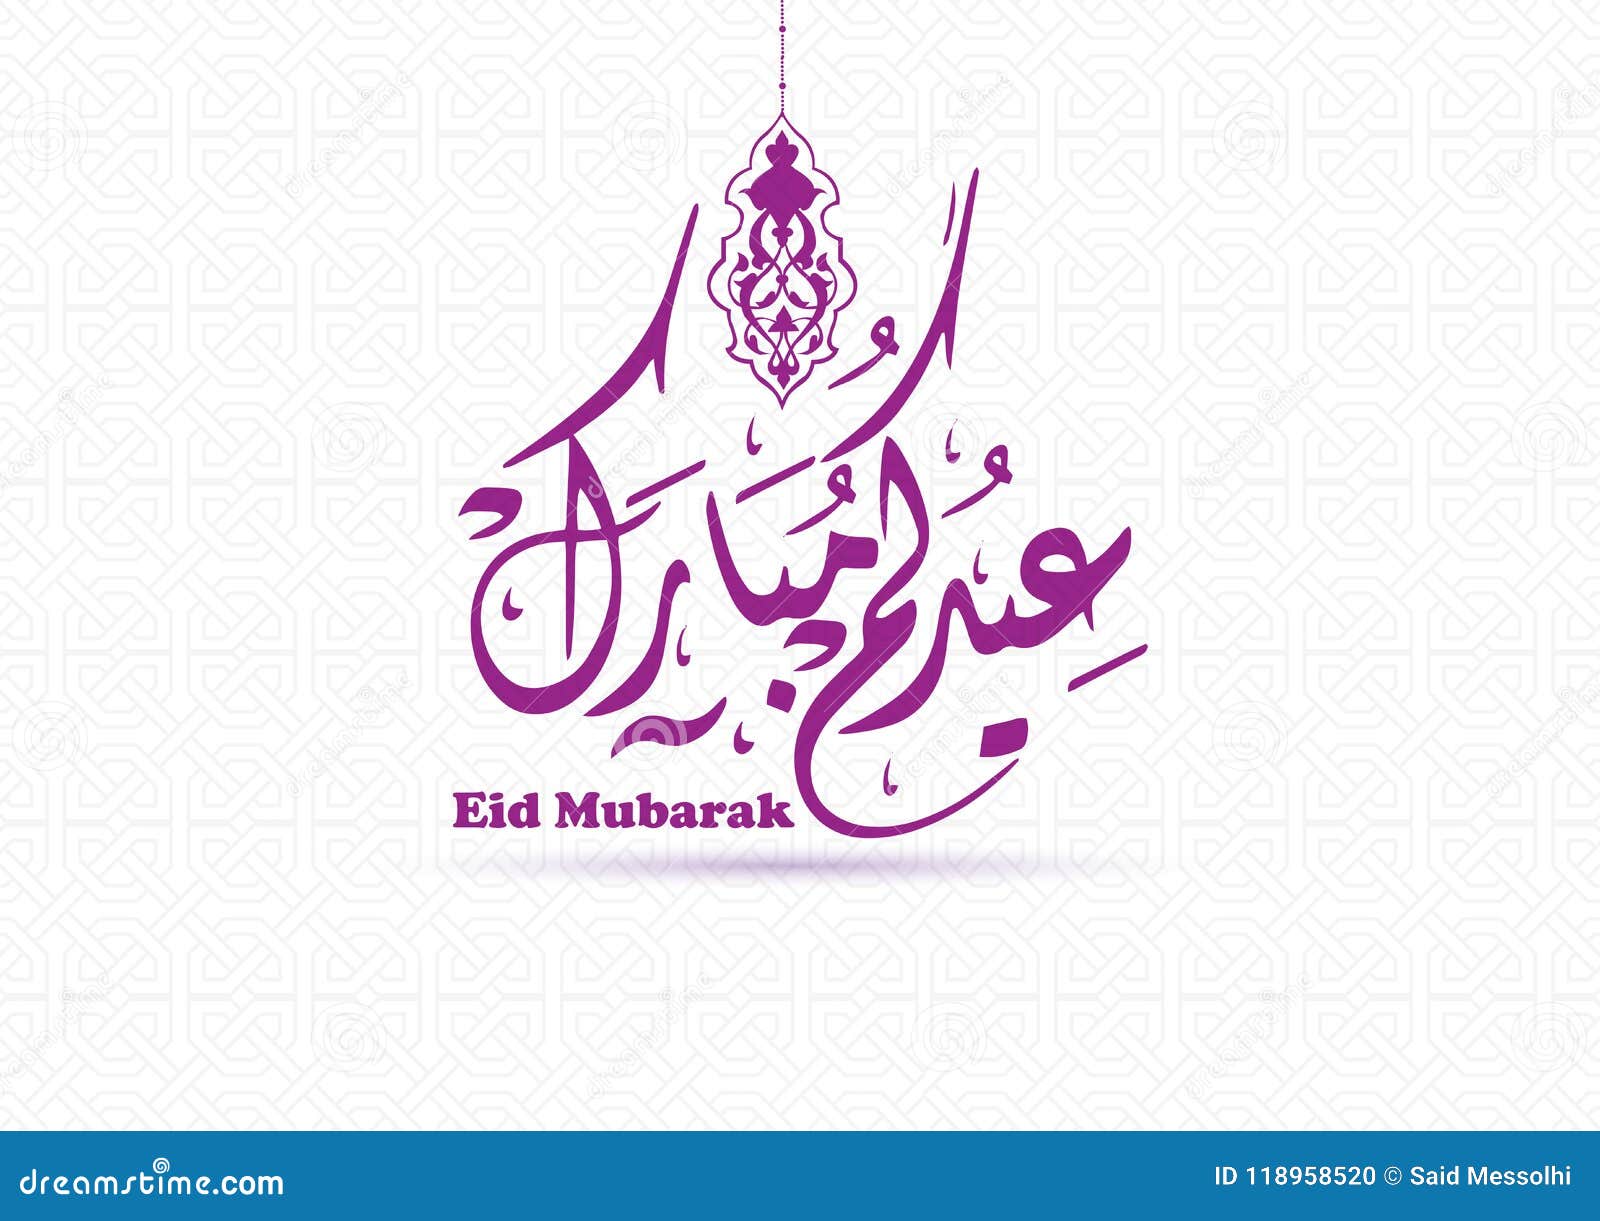 Eid Mubarak Messages In Arabic With English Translation - Collection de